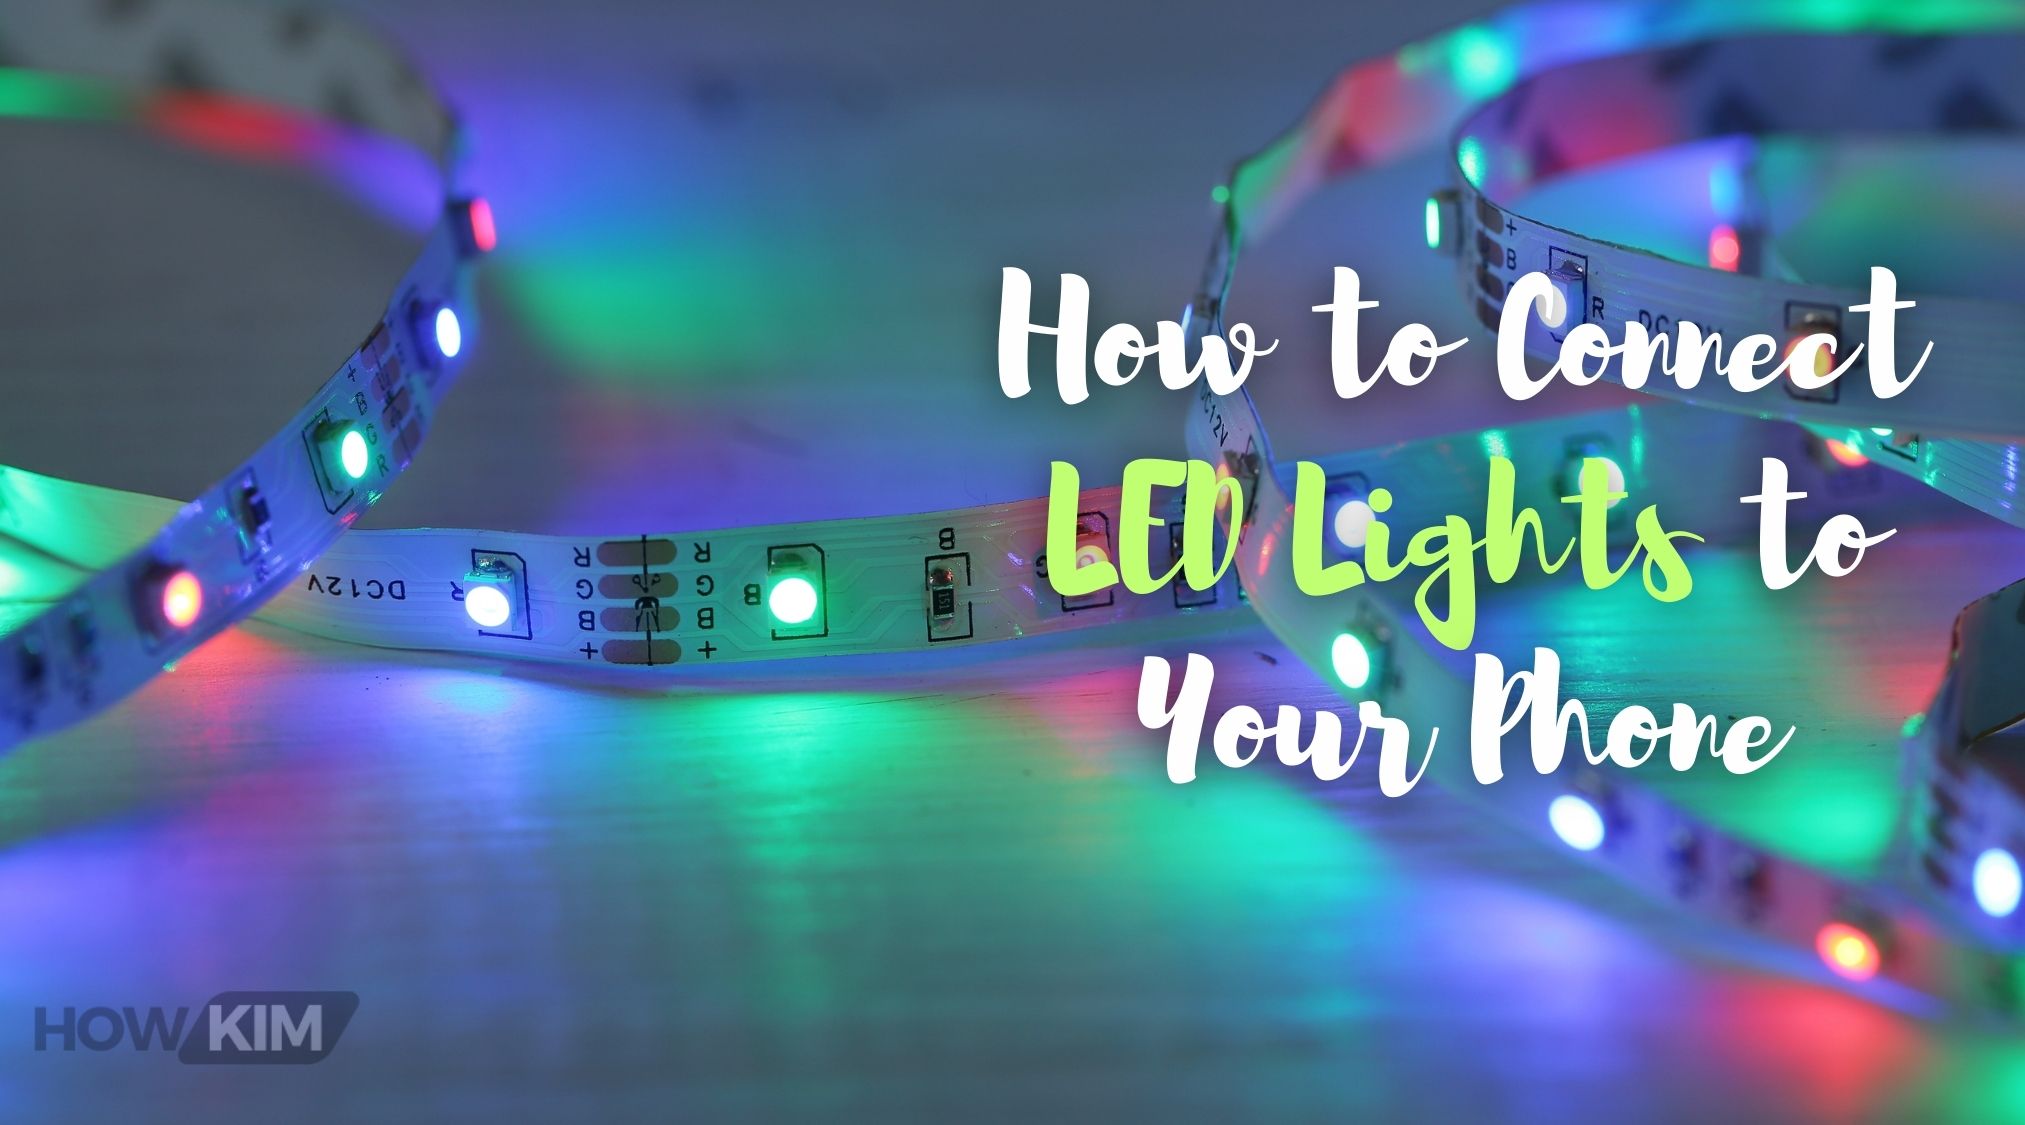 How to Connect LED Lights to Your Phone